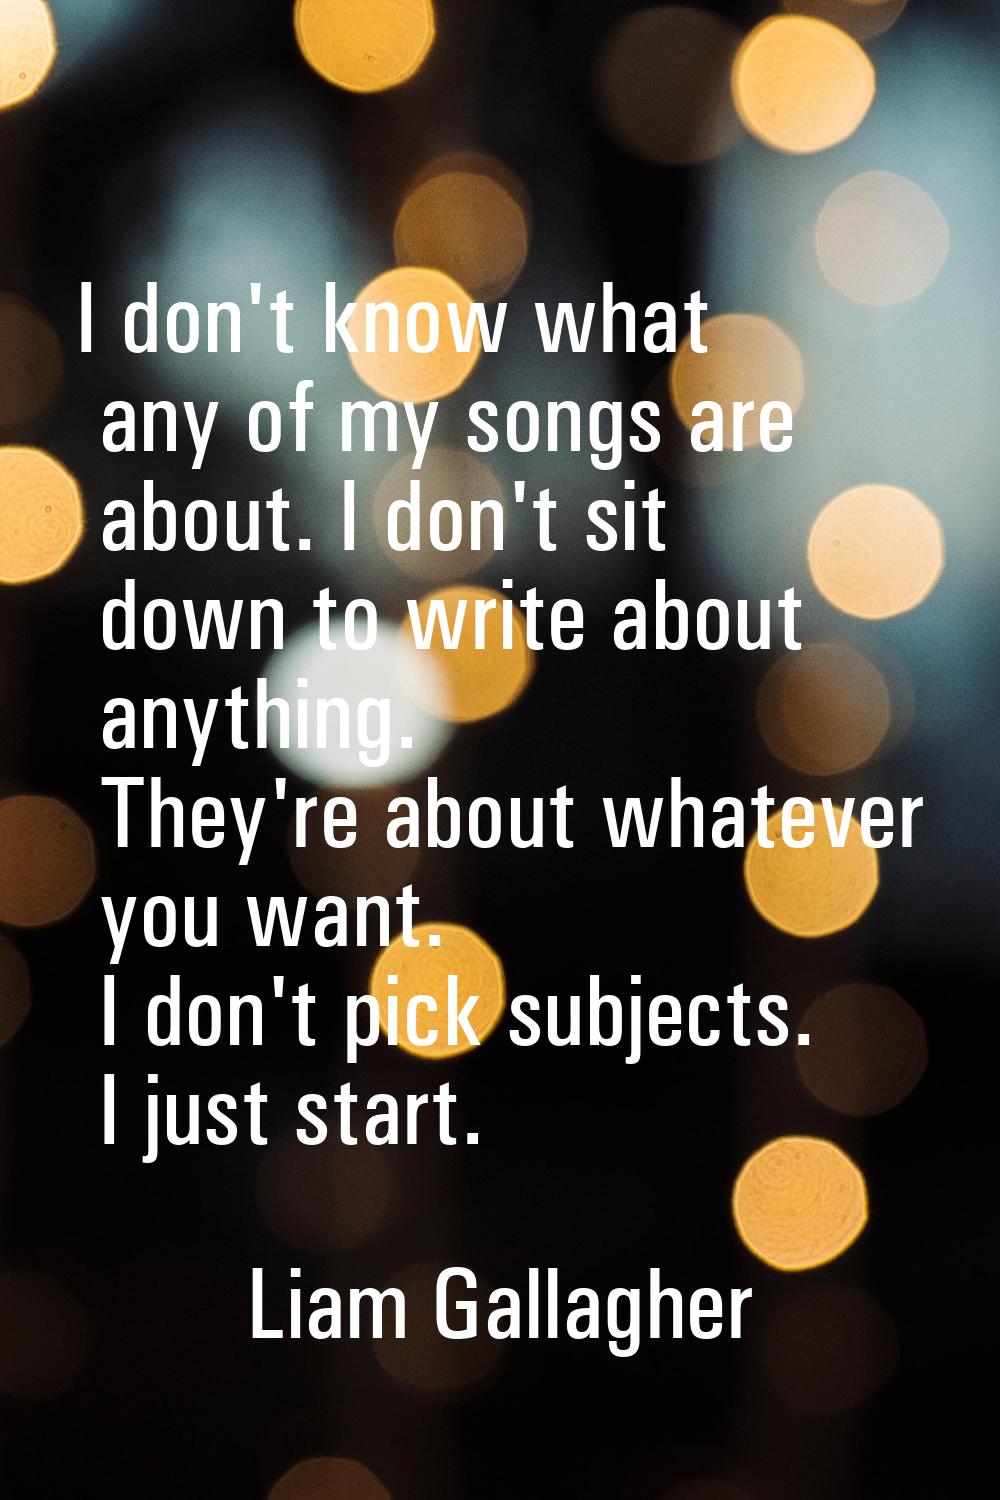 I don't know what any of my songs are about. I don't sit down to write about anything. They're abou